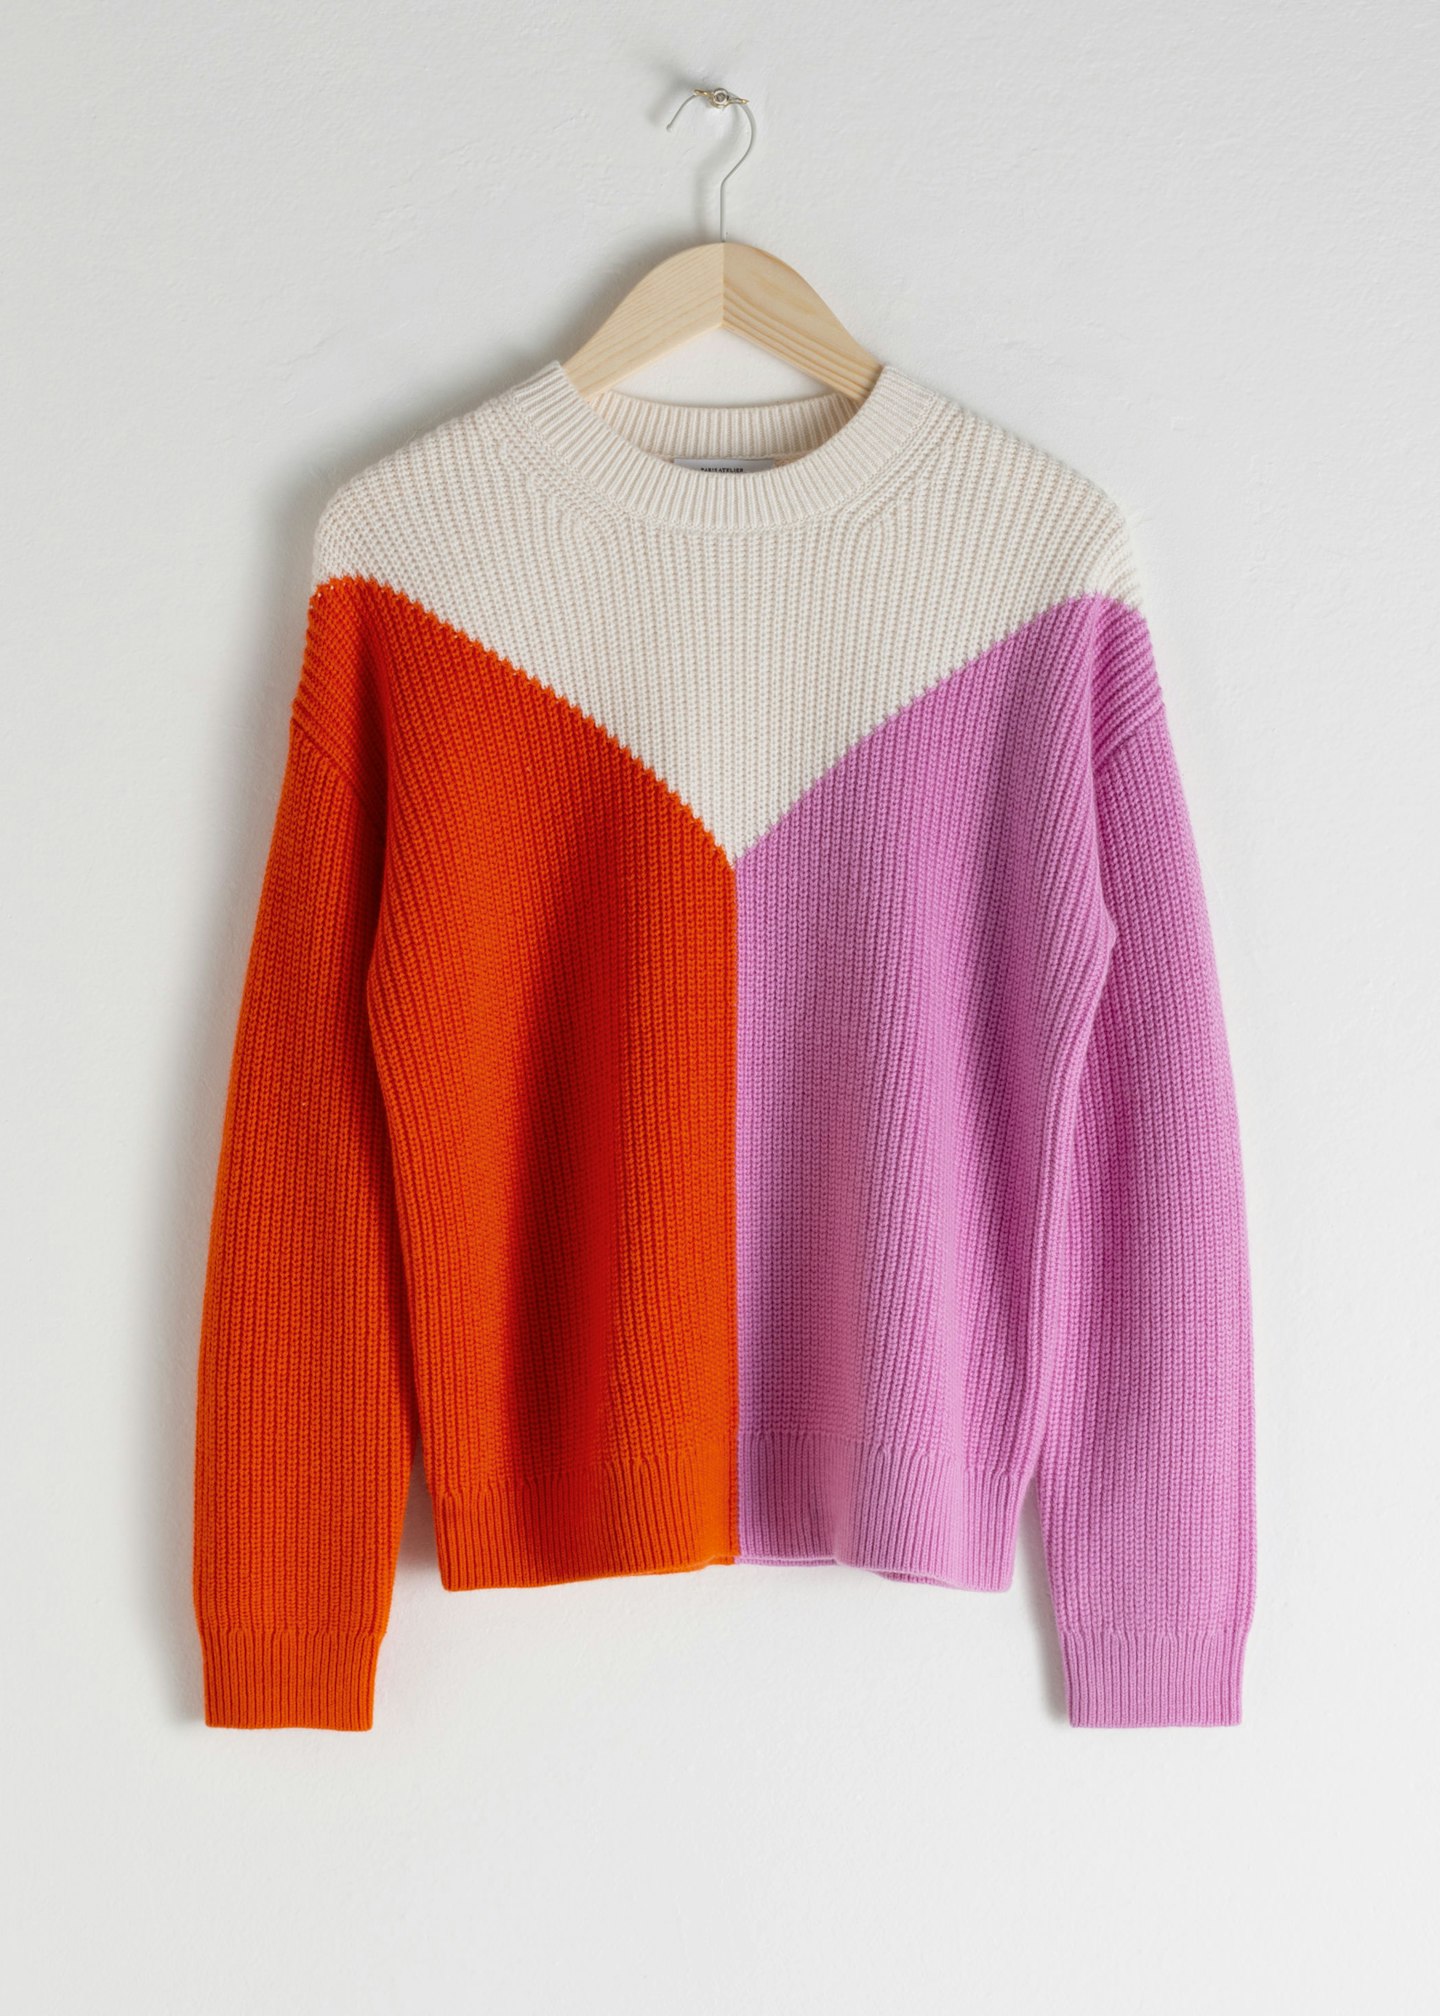 & Other Stories, Wool Jumper, £59